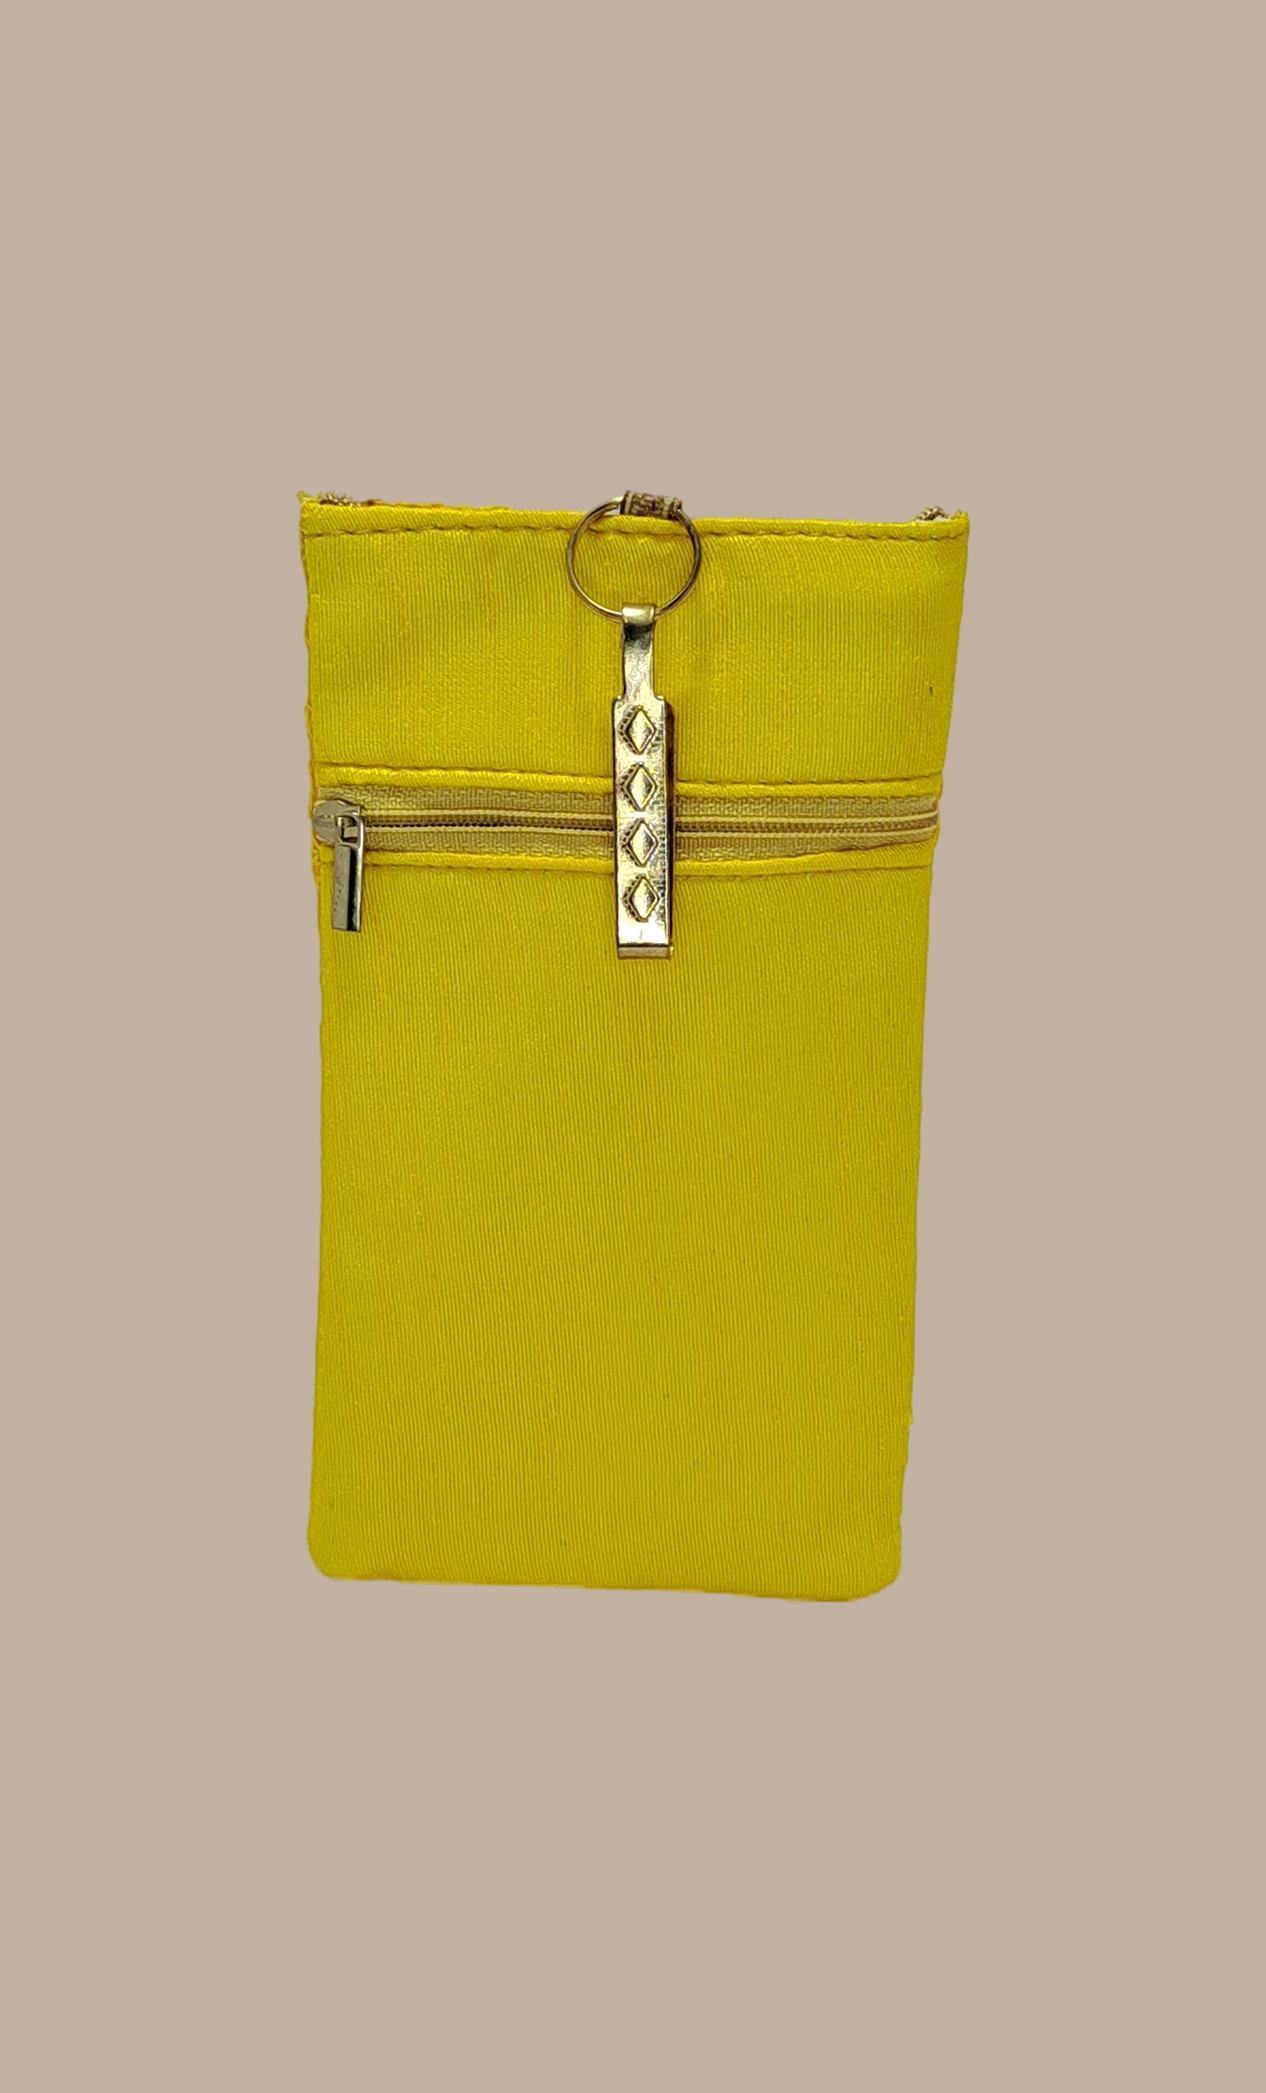 Sunshine Yellow Cell Phone Pouch Bag